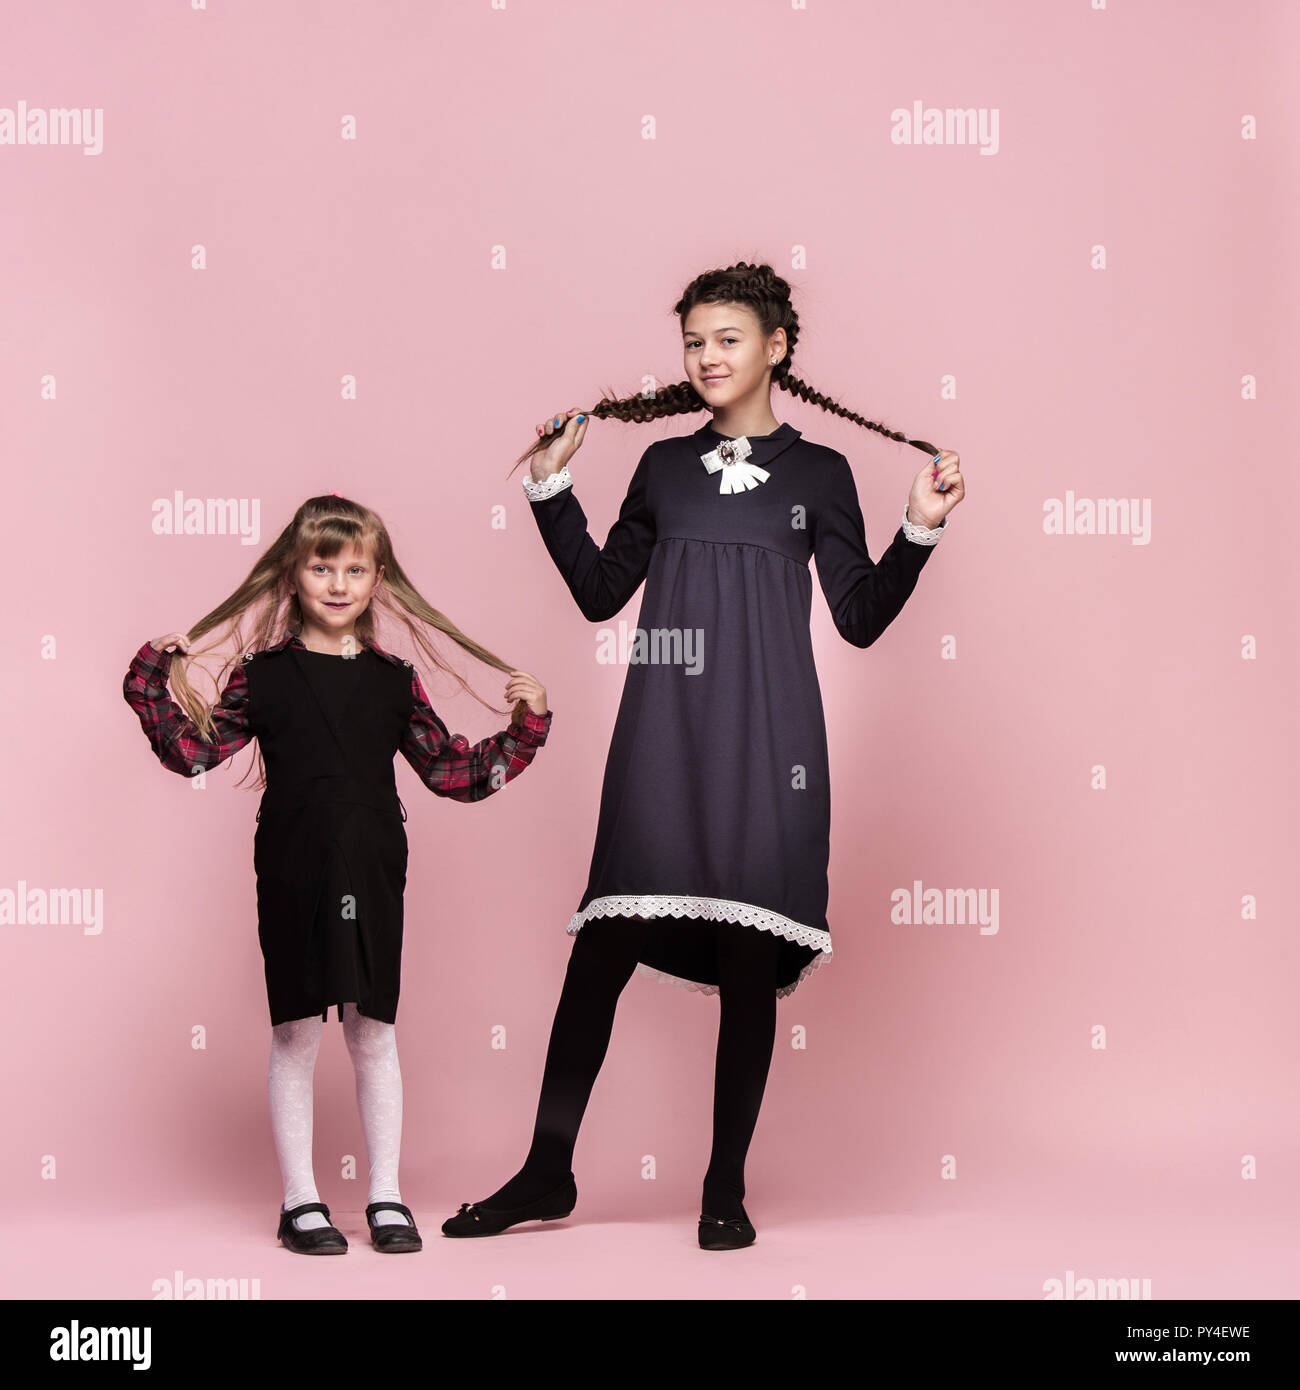 Cute smiling happy stylish children on pink background. Beautiful stylish teen girls standing together and posing at studio. Classic style. Kids fashion and emotions concept. Stock Photo